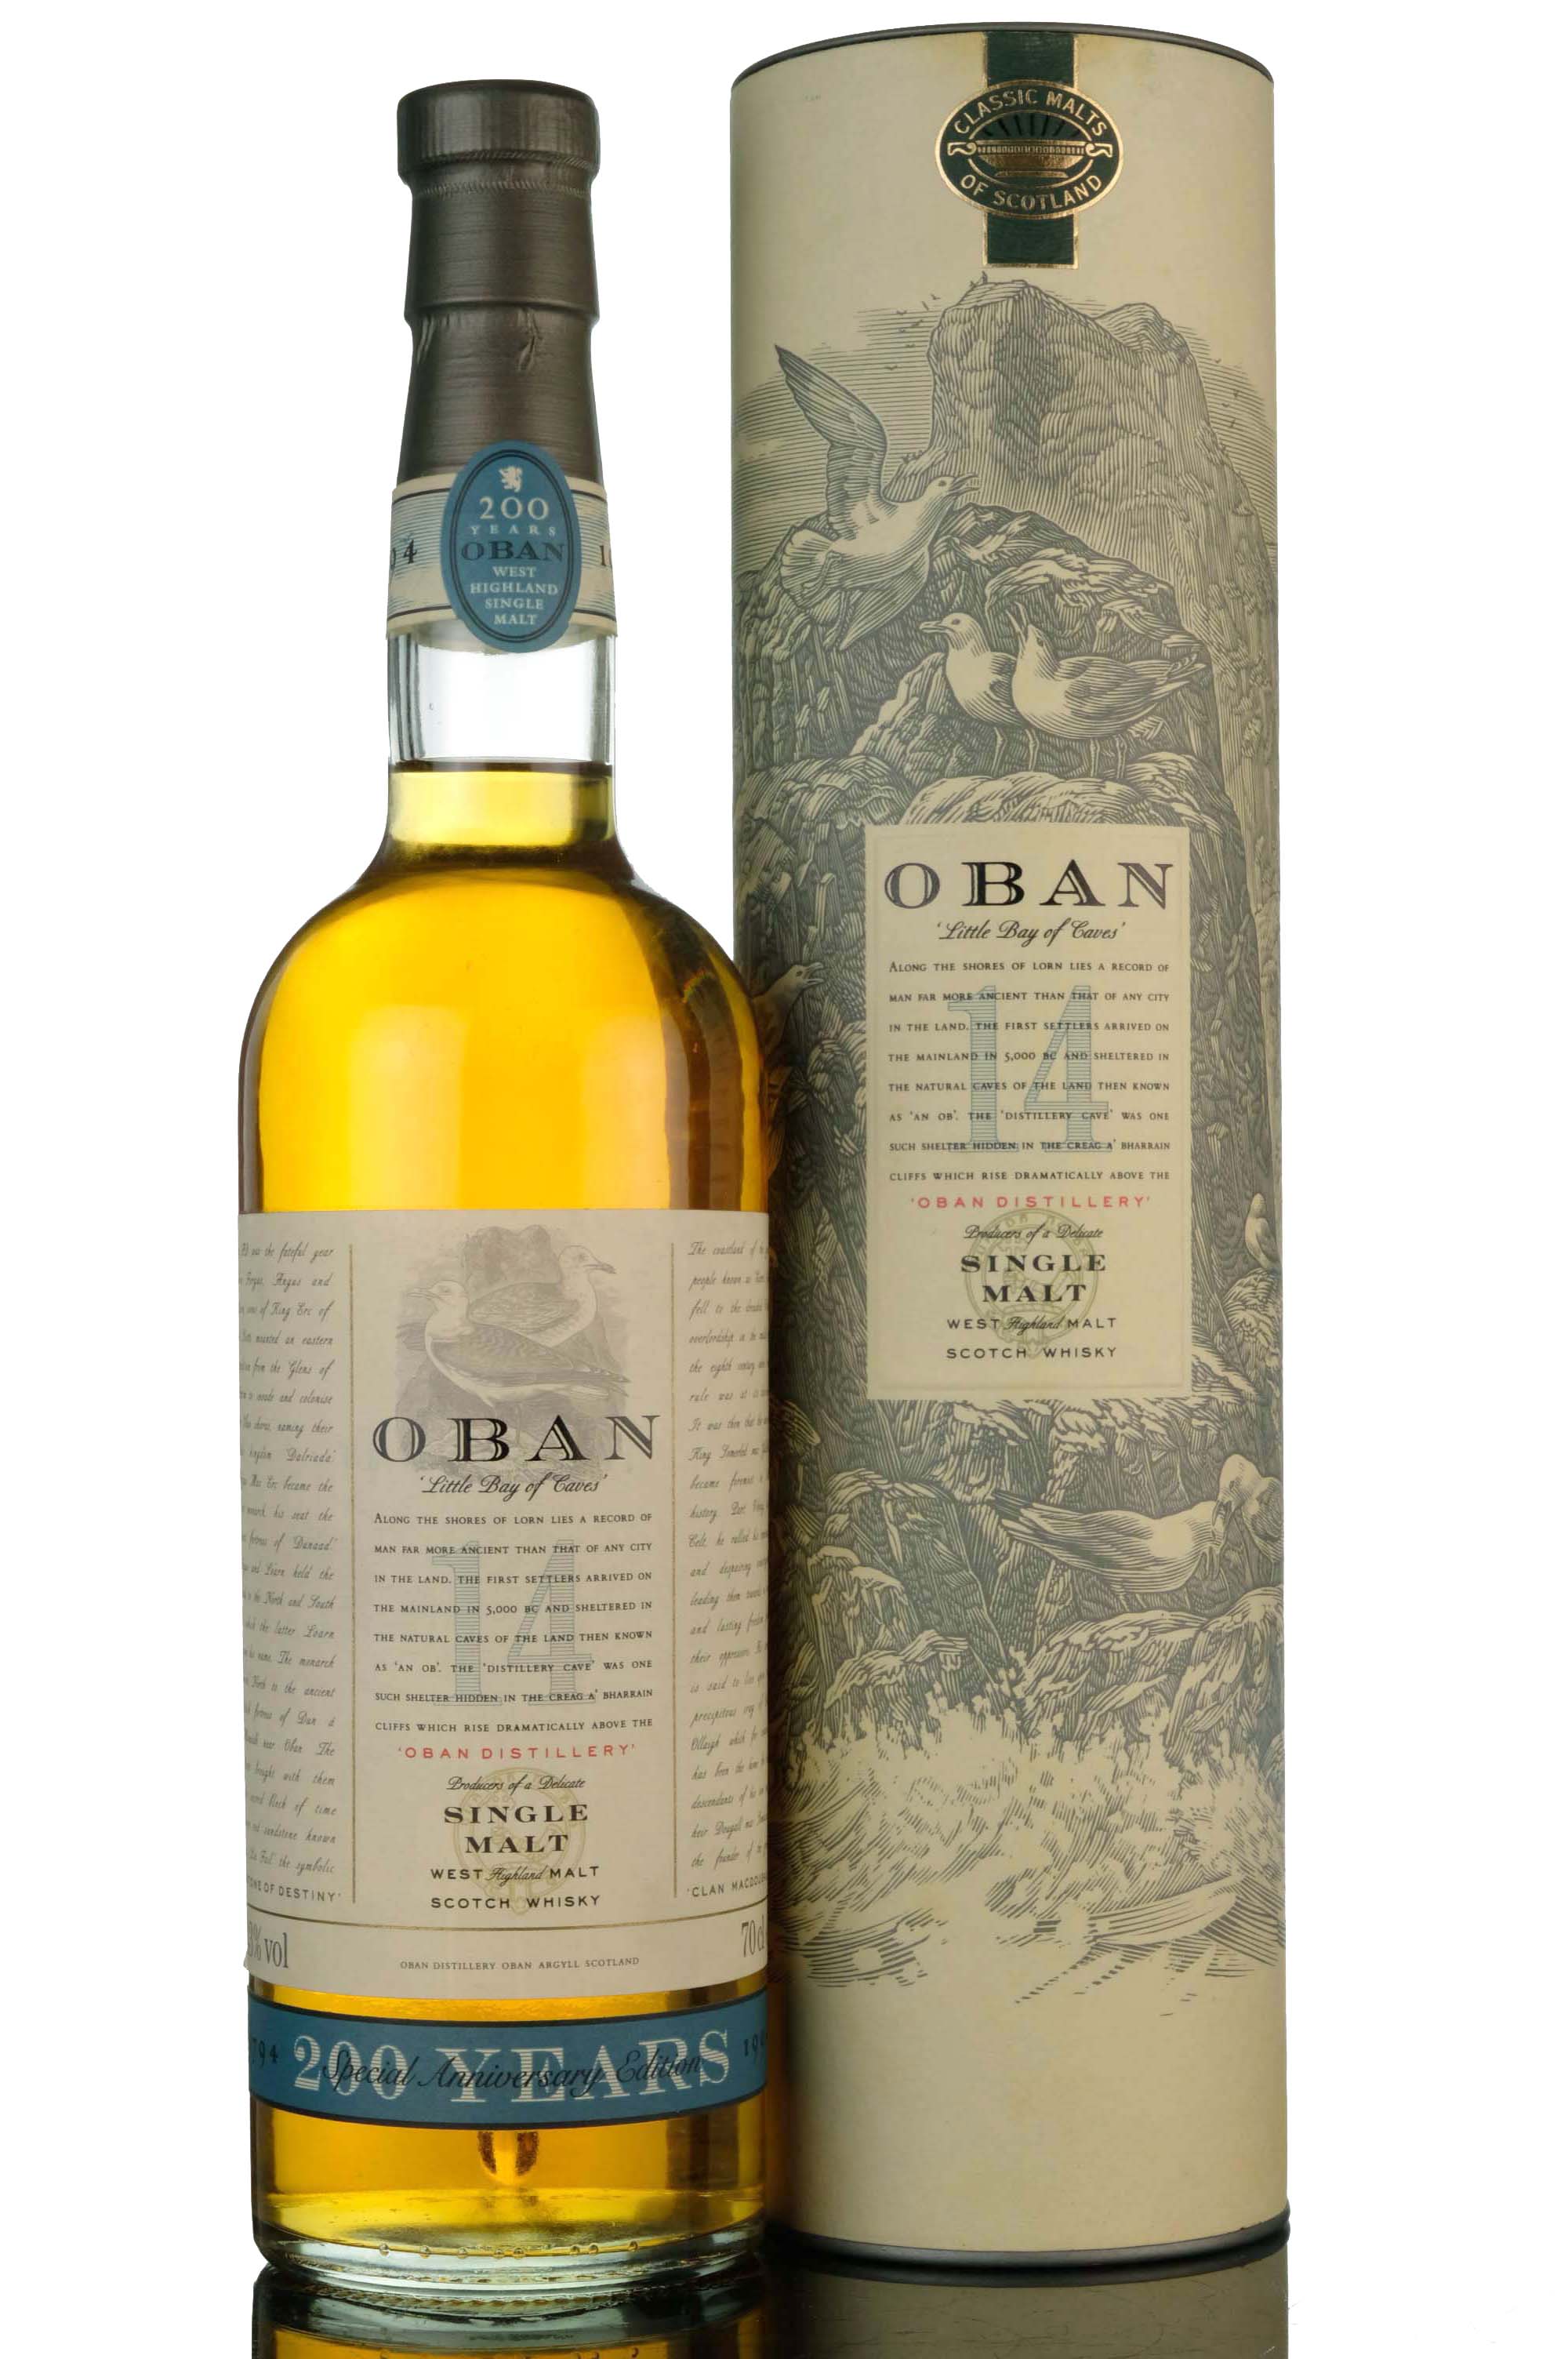 Oban 14 Year Old - 200th Anniversary 1794-1994